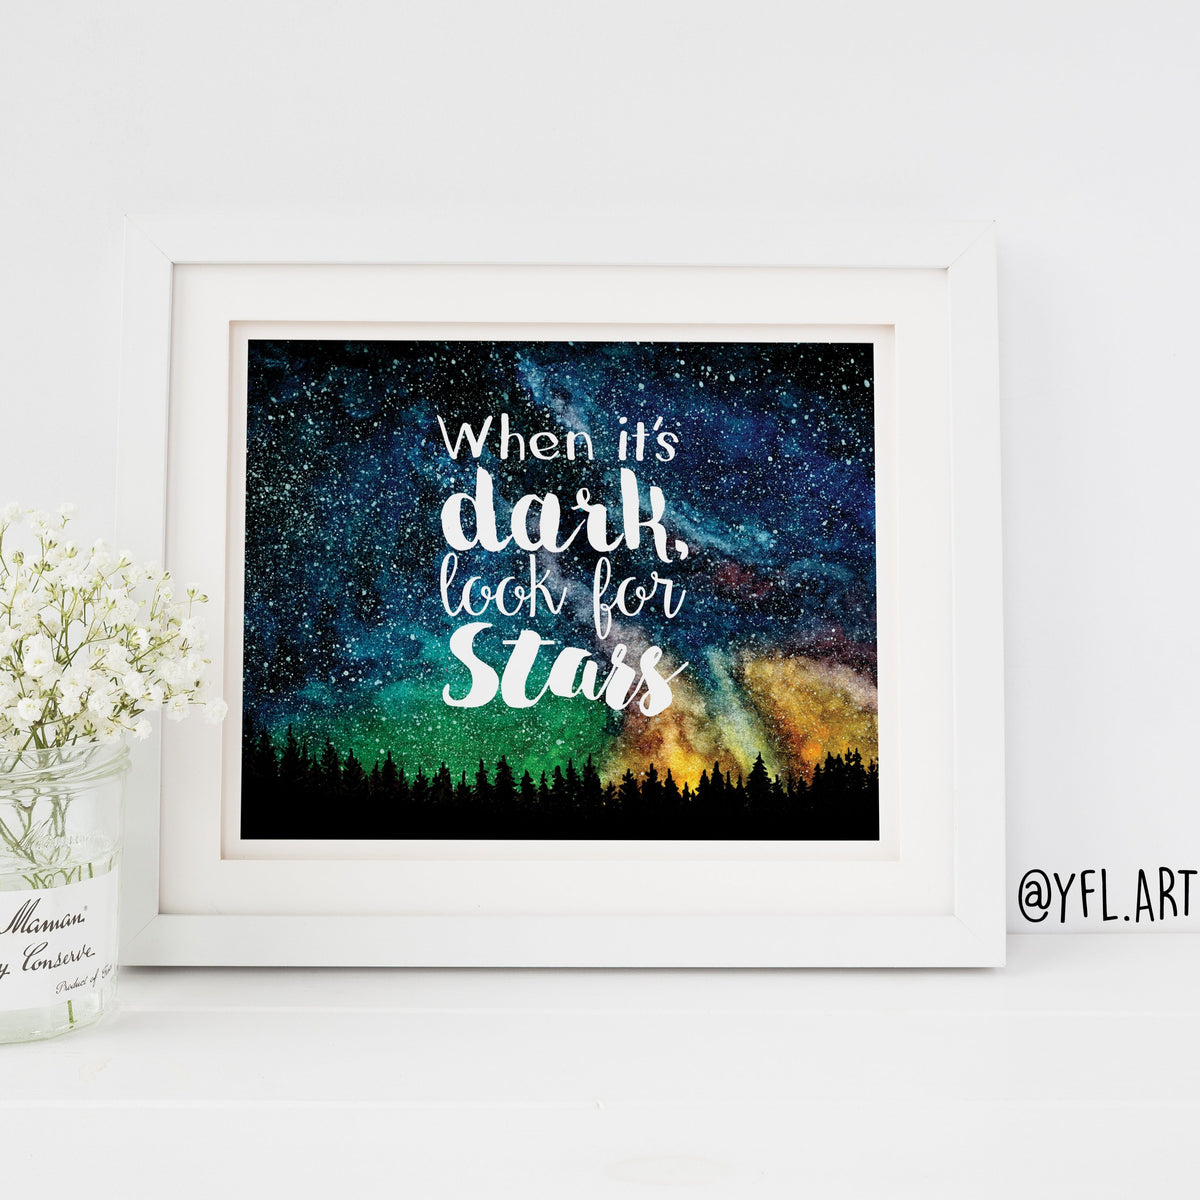 When it's dark look for stars - Download - Watercolour print or wallpaper